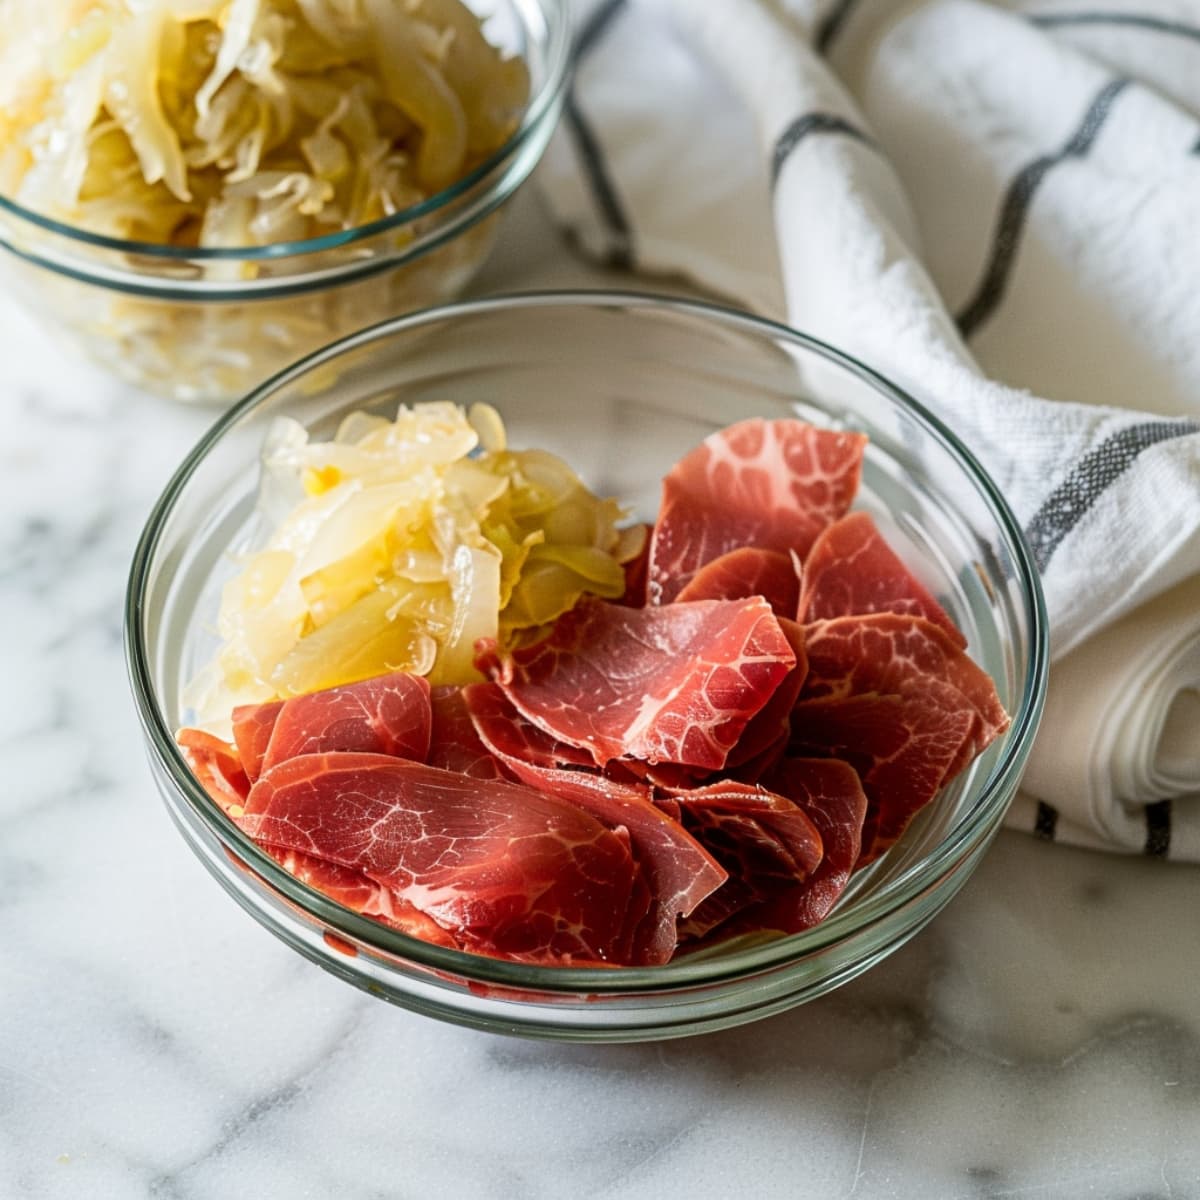 A glass bowl of raw corned beef and sauerkraut